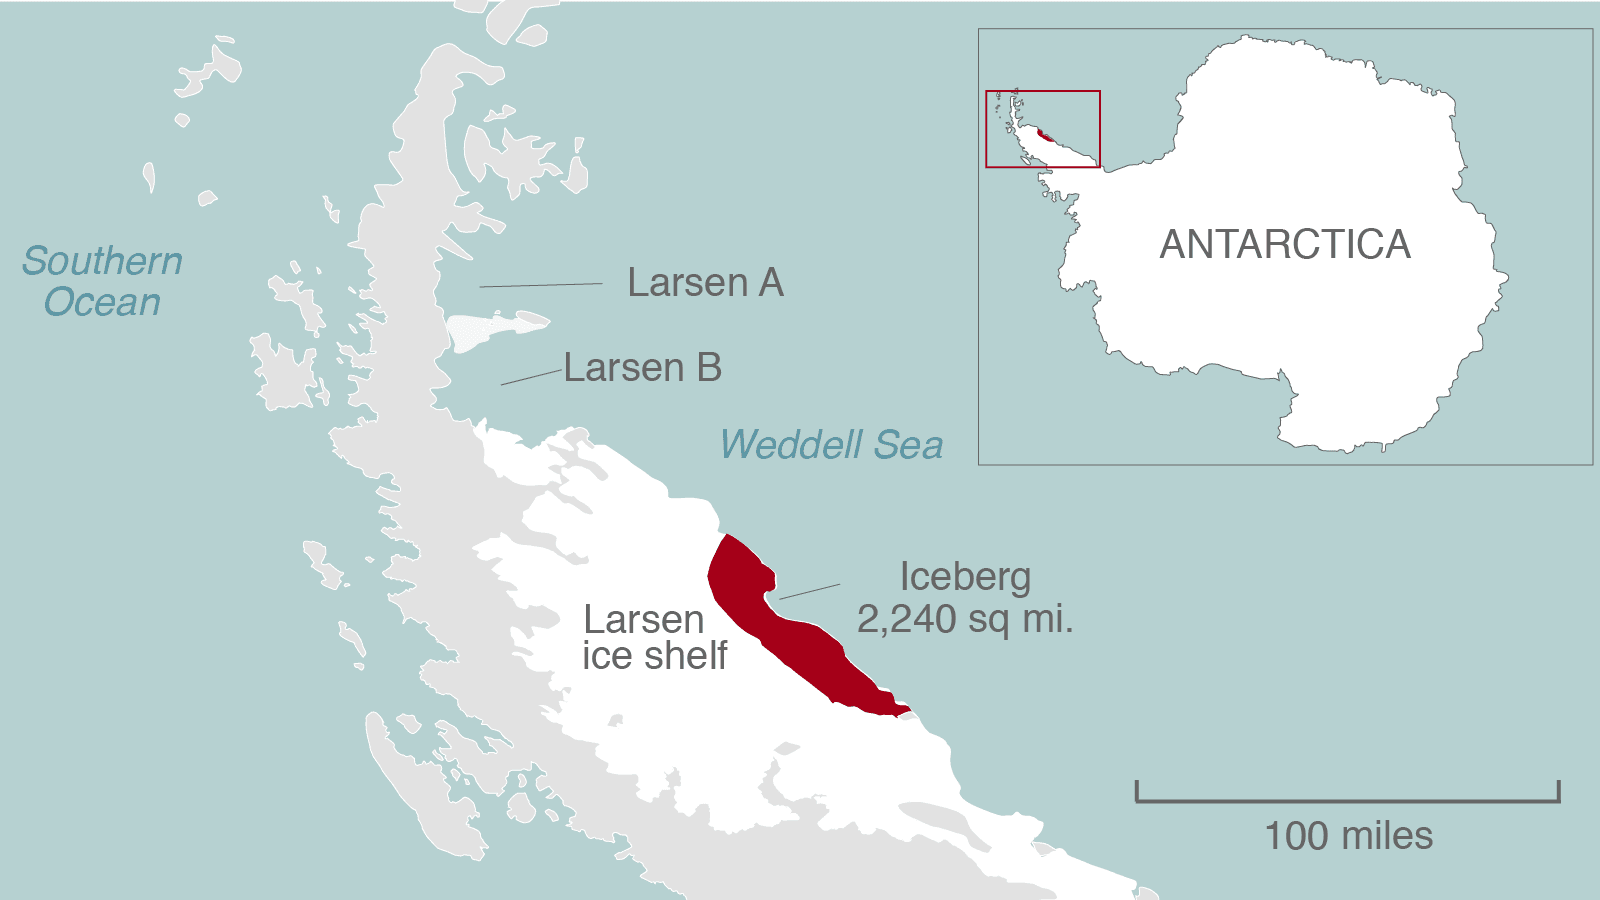 A map of Antarctica shows where the Larsen C ice shelf has broken, creating one of the largest icebergs ever since observation began. The iceberg is roughly the size of Delaware.